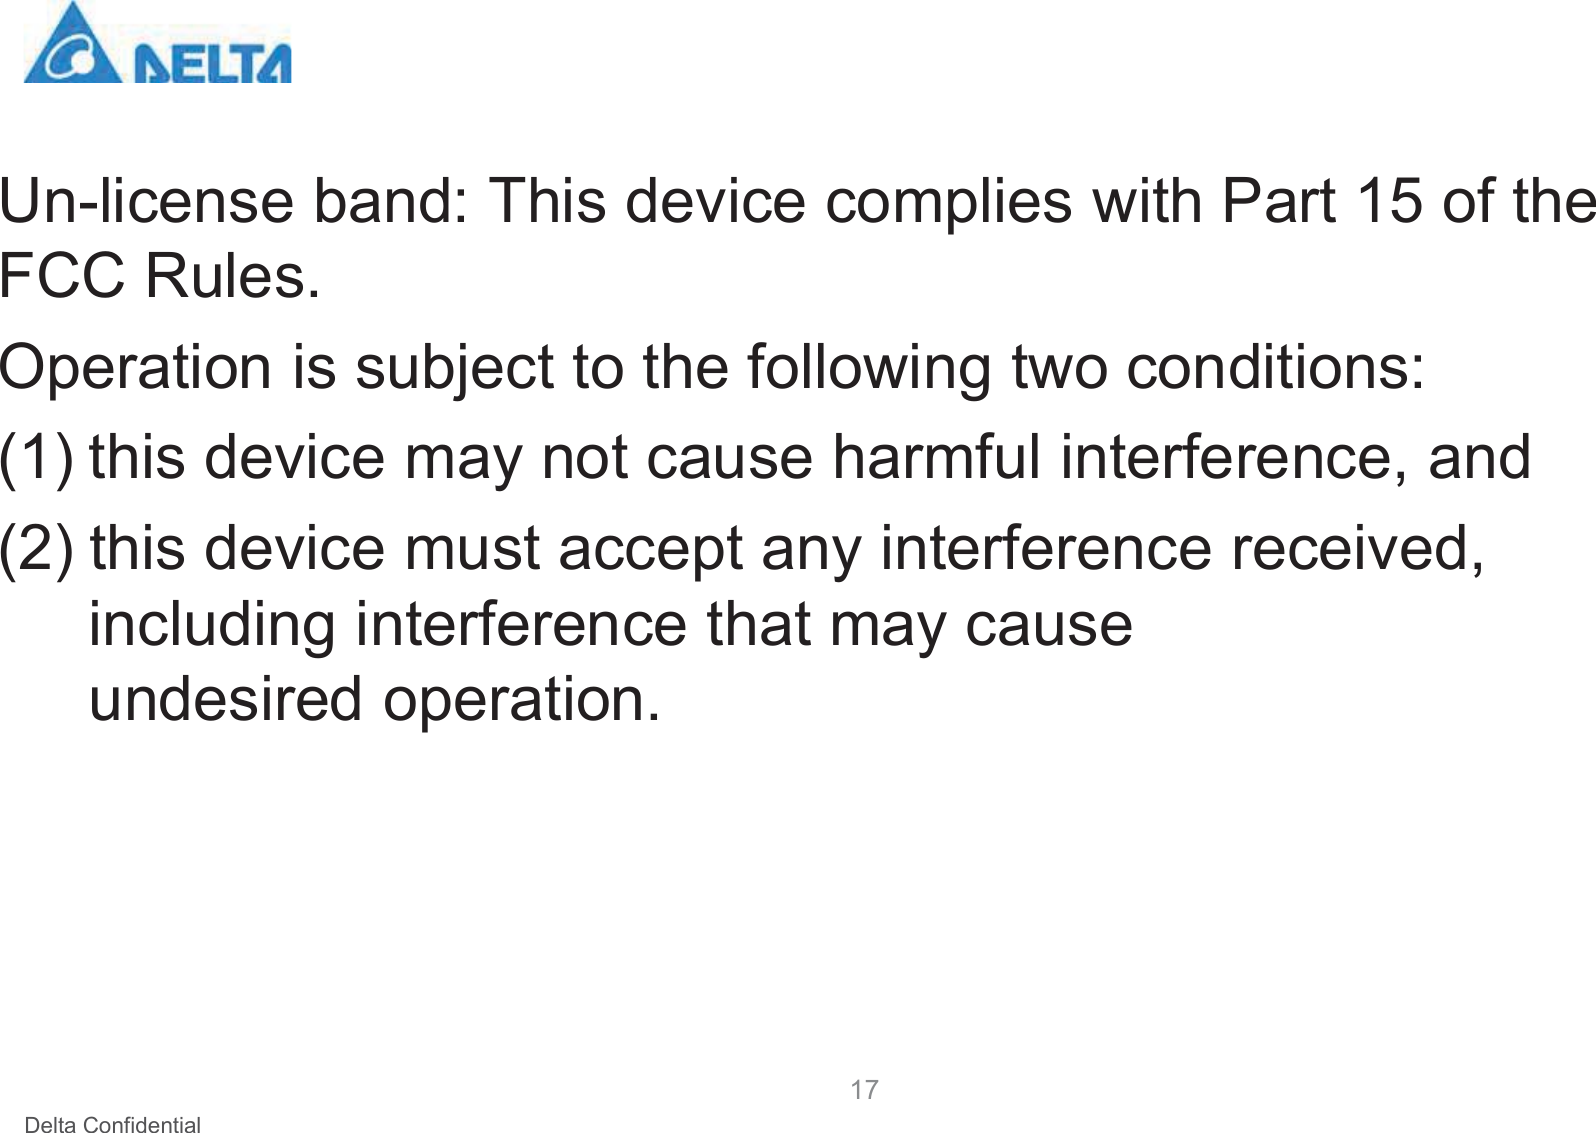 Delta ConfidentialUn-license band: This device complies with Part 15 of the FCC Rules. Operation is subject to the following two conditions:(1) this device may not cause harmful interference, and (2) this device must accept any interference received, including interference that may cause undesired operation. 17